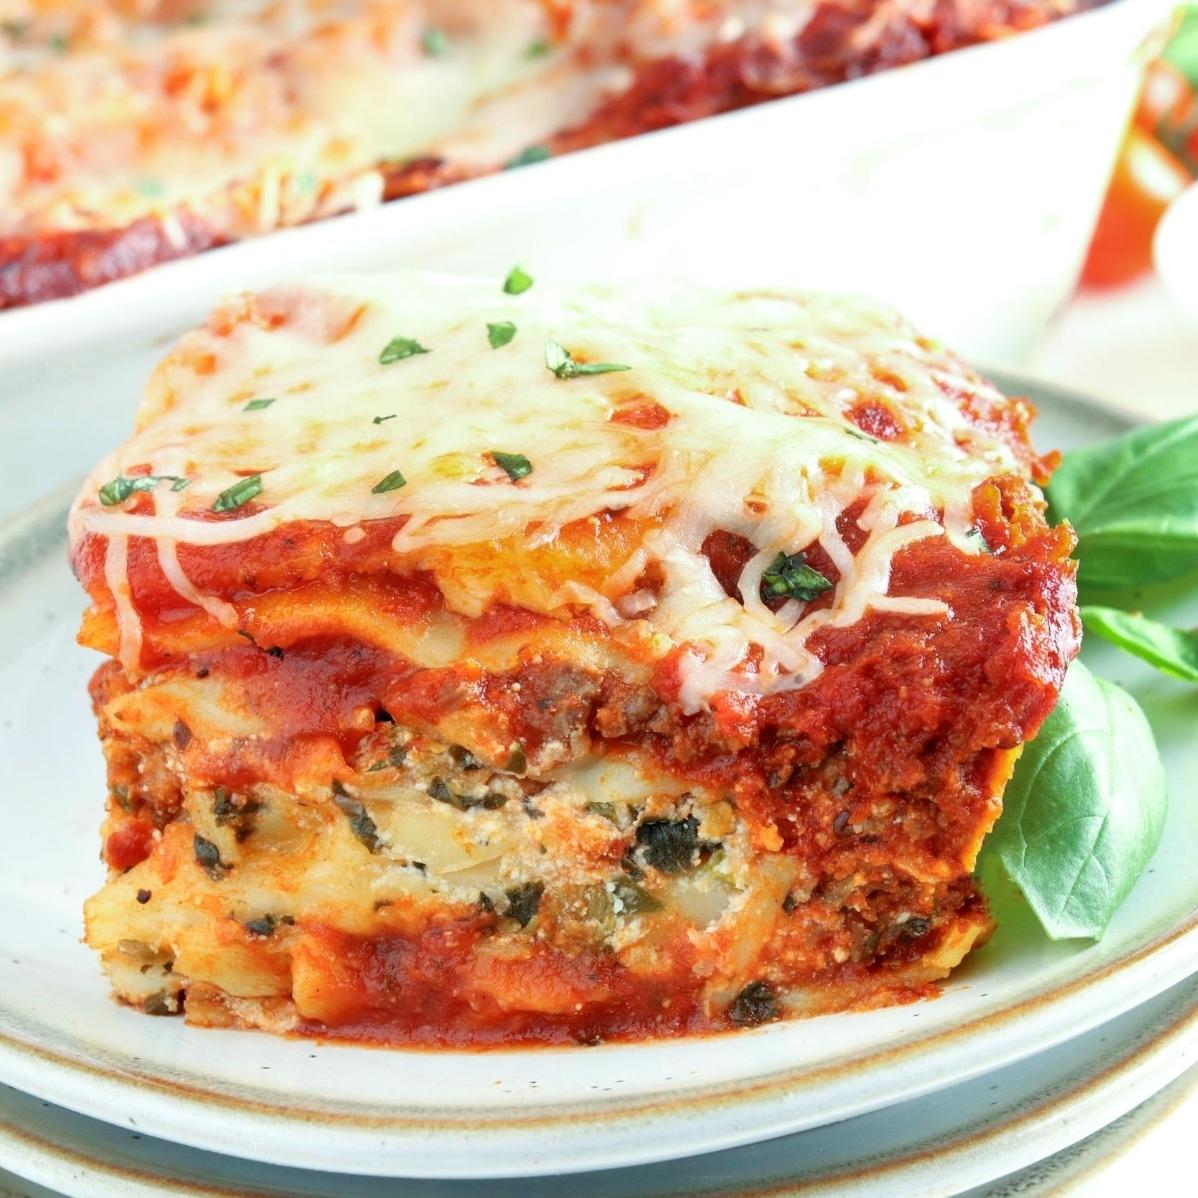  Layers of gluten-free lasagna noodles, seasoned ground meat, and colorful veggies make this dish a feast for the eyes and the taste buds.